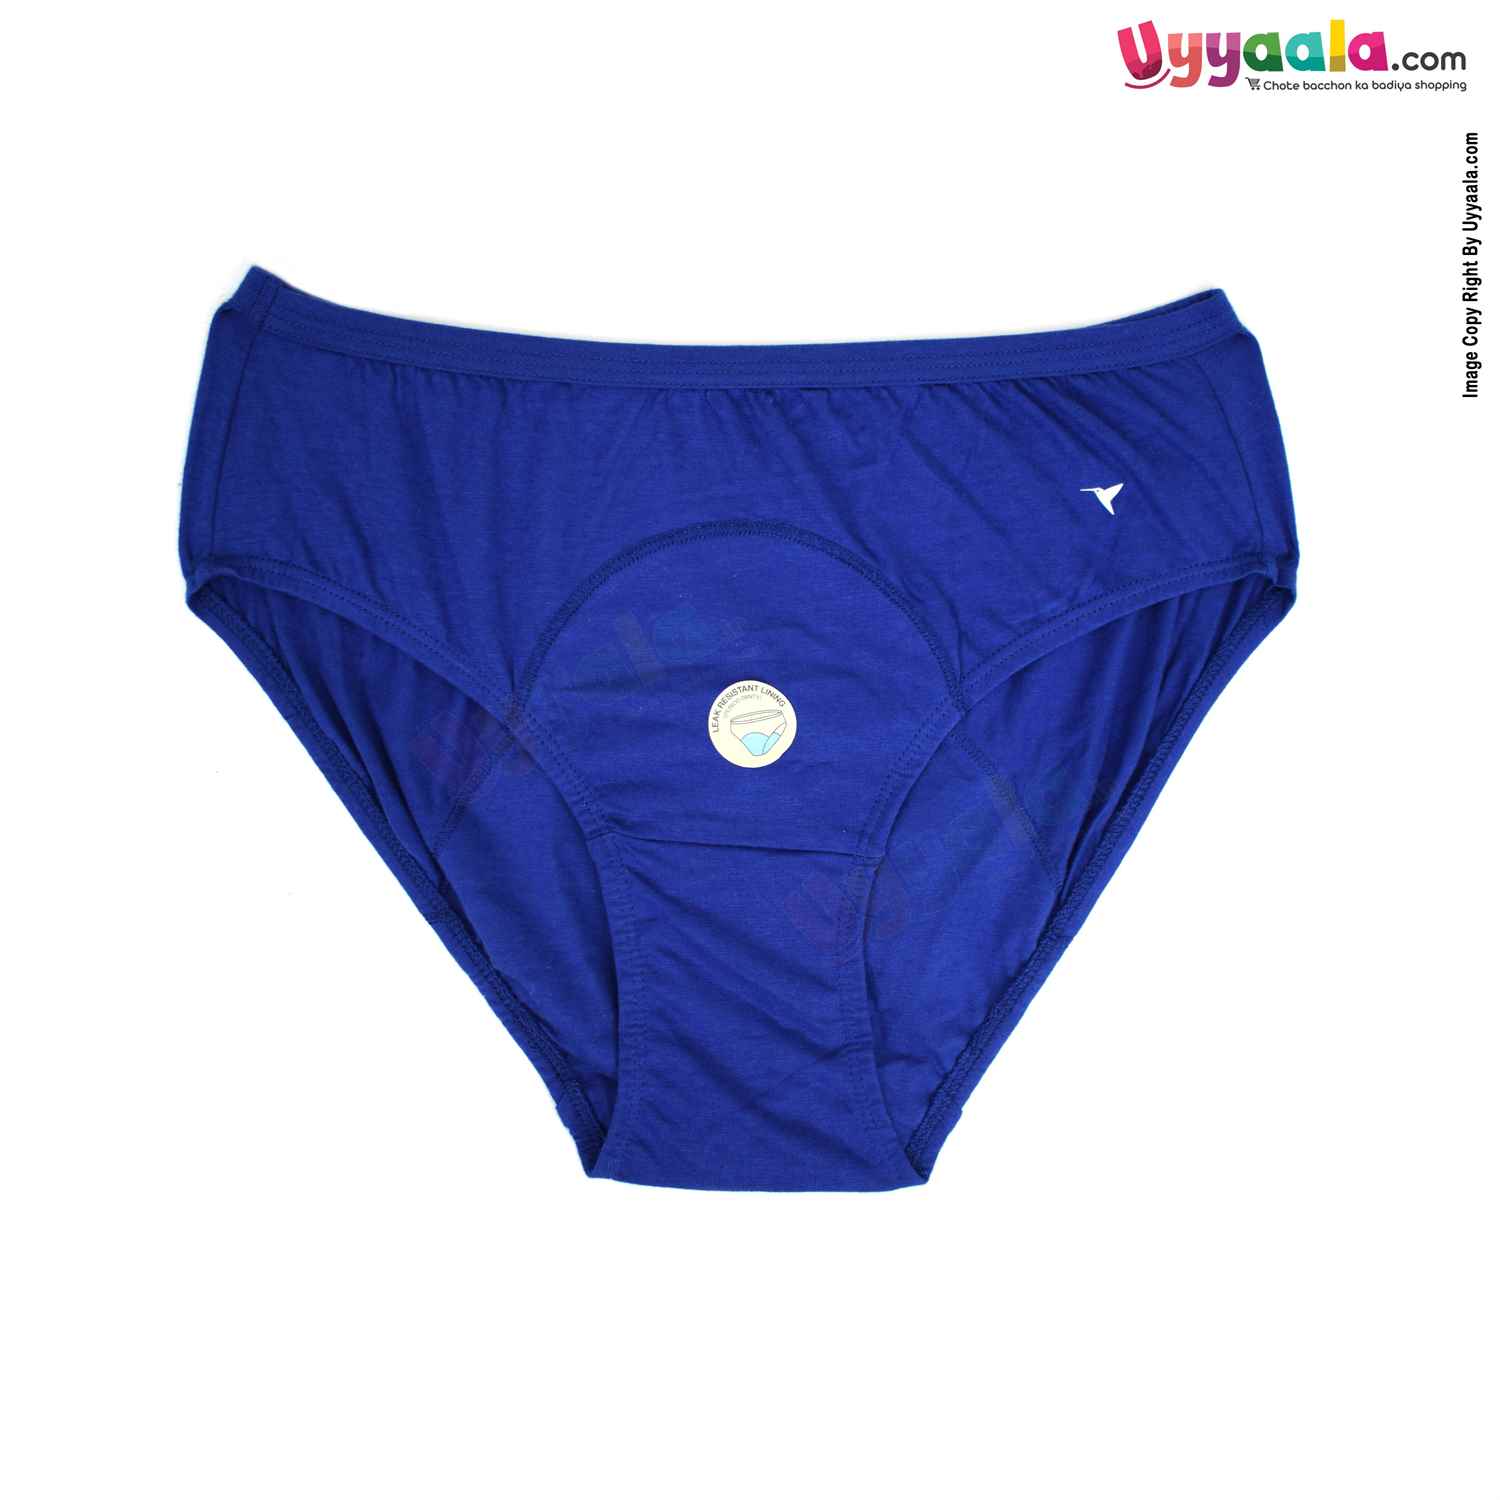 Buy soft cotton Blossom Maternity Panties Online in India